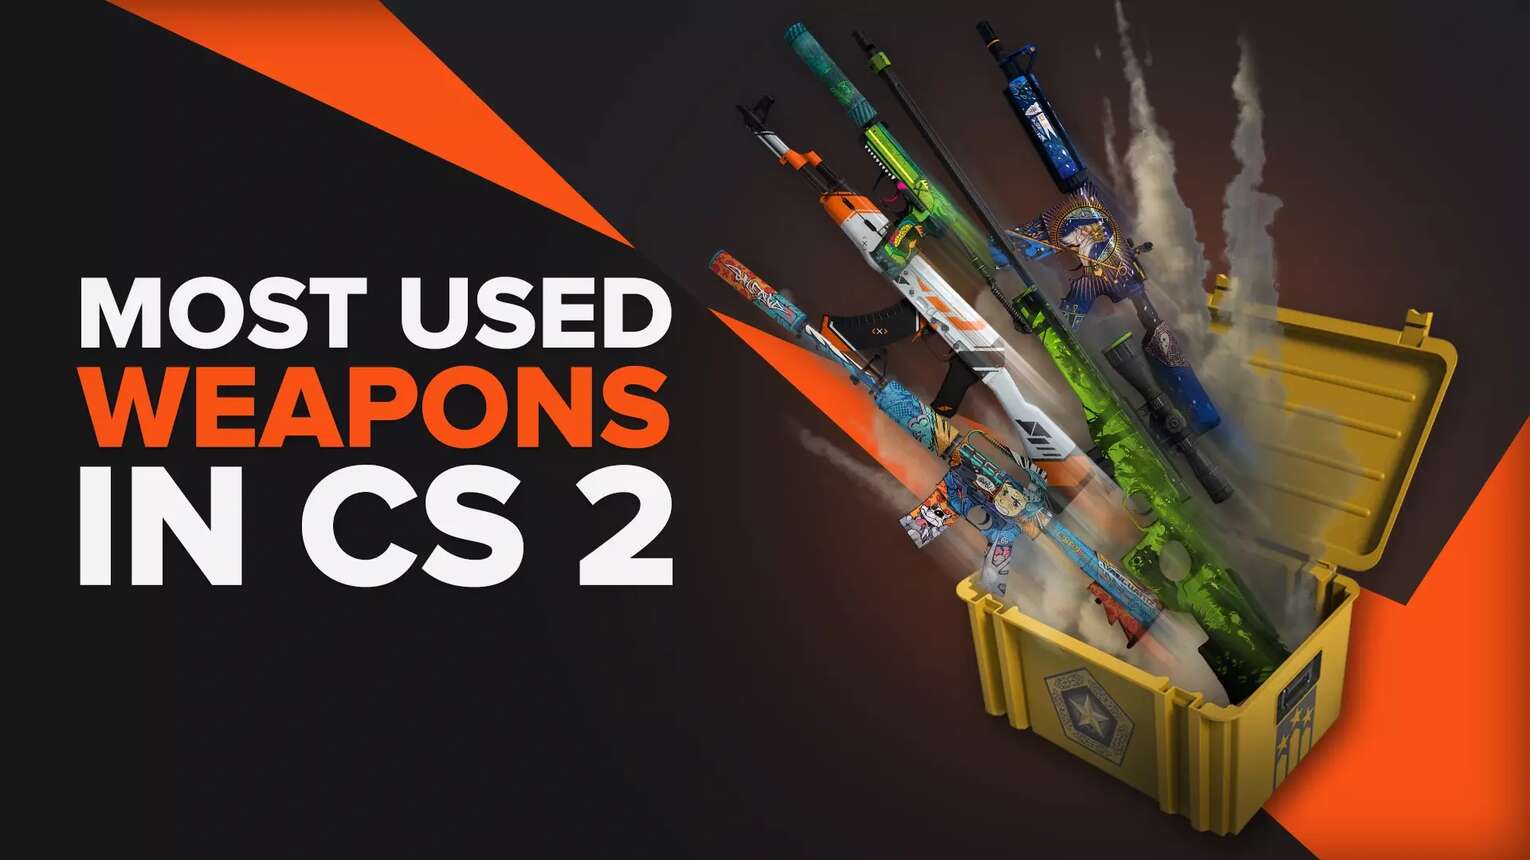 The Top 10 Most Used Weapons In CS2 (CSGO) [Ranked]